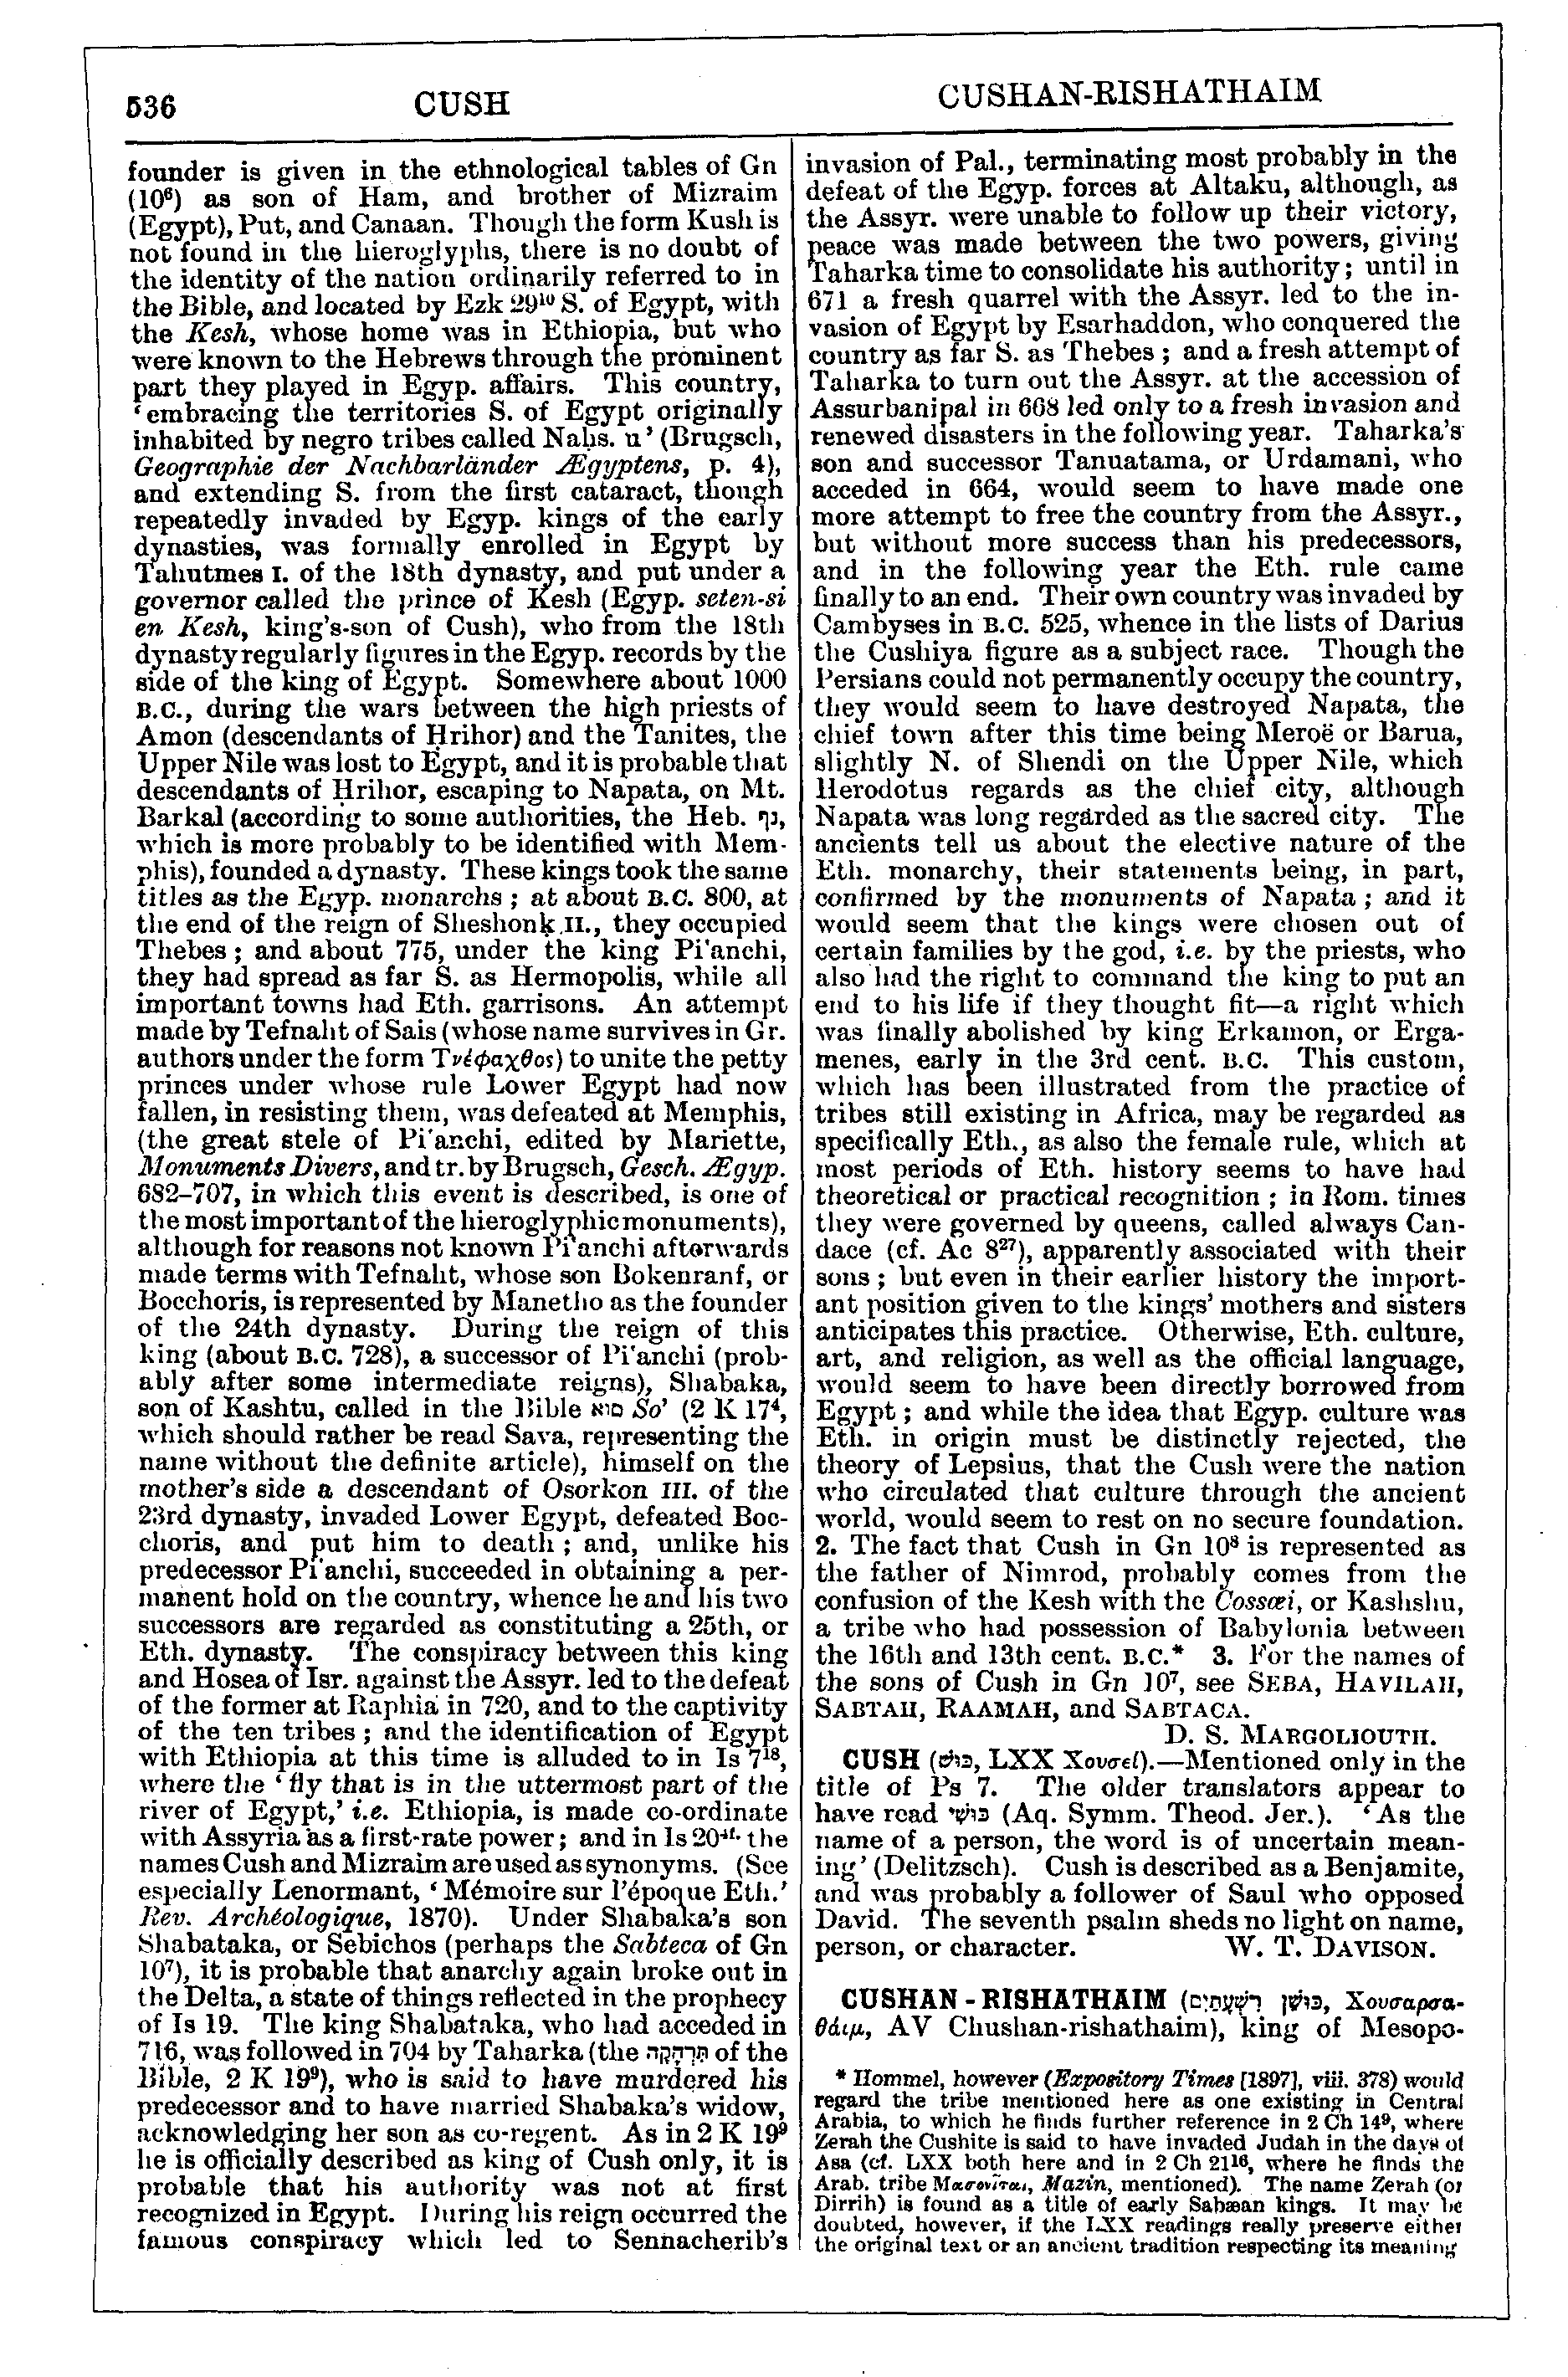 Image of page 536